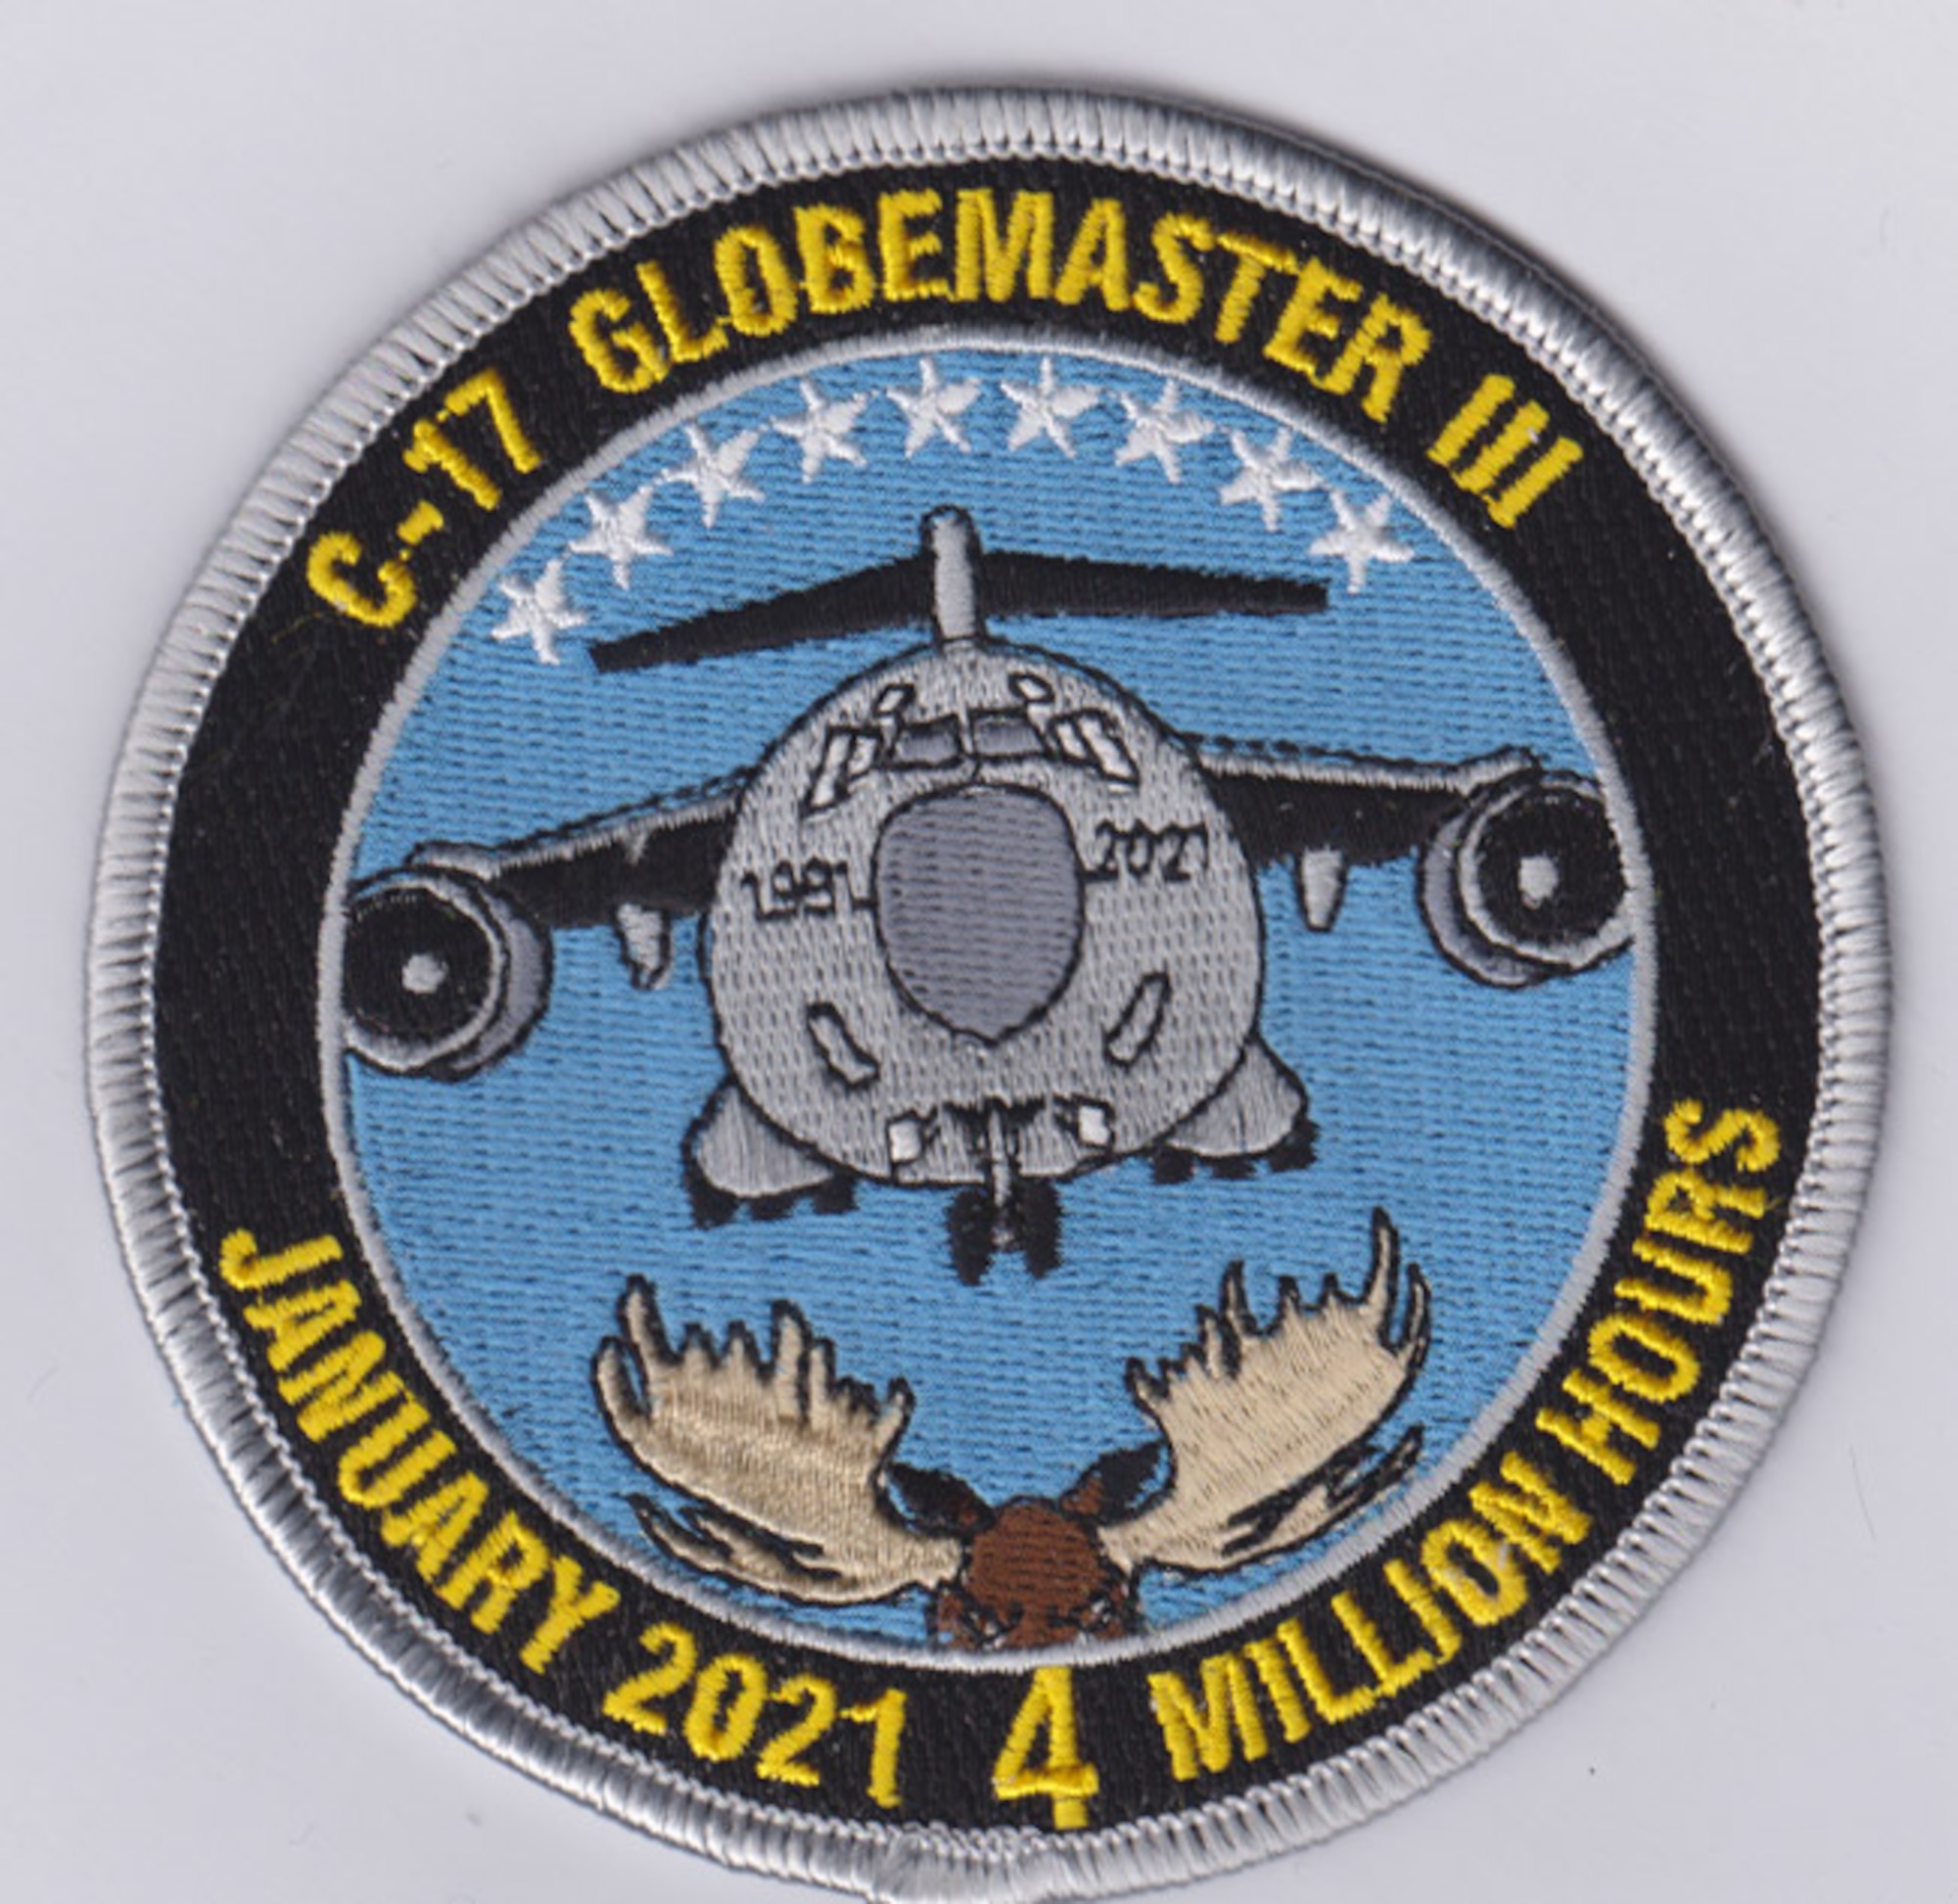 Kevin Torres, a section chief and avionics engineer in the C-17 Program Office, created a patch to commemorate the four million flight hour mark reached by the C-17 fleet in January of 2021. (Courtesy photo)